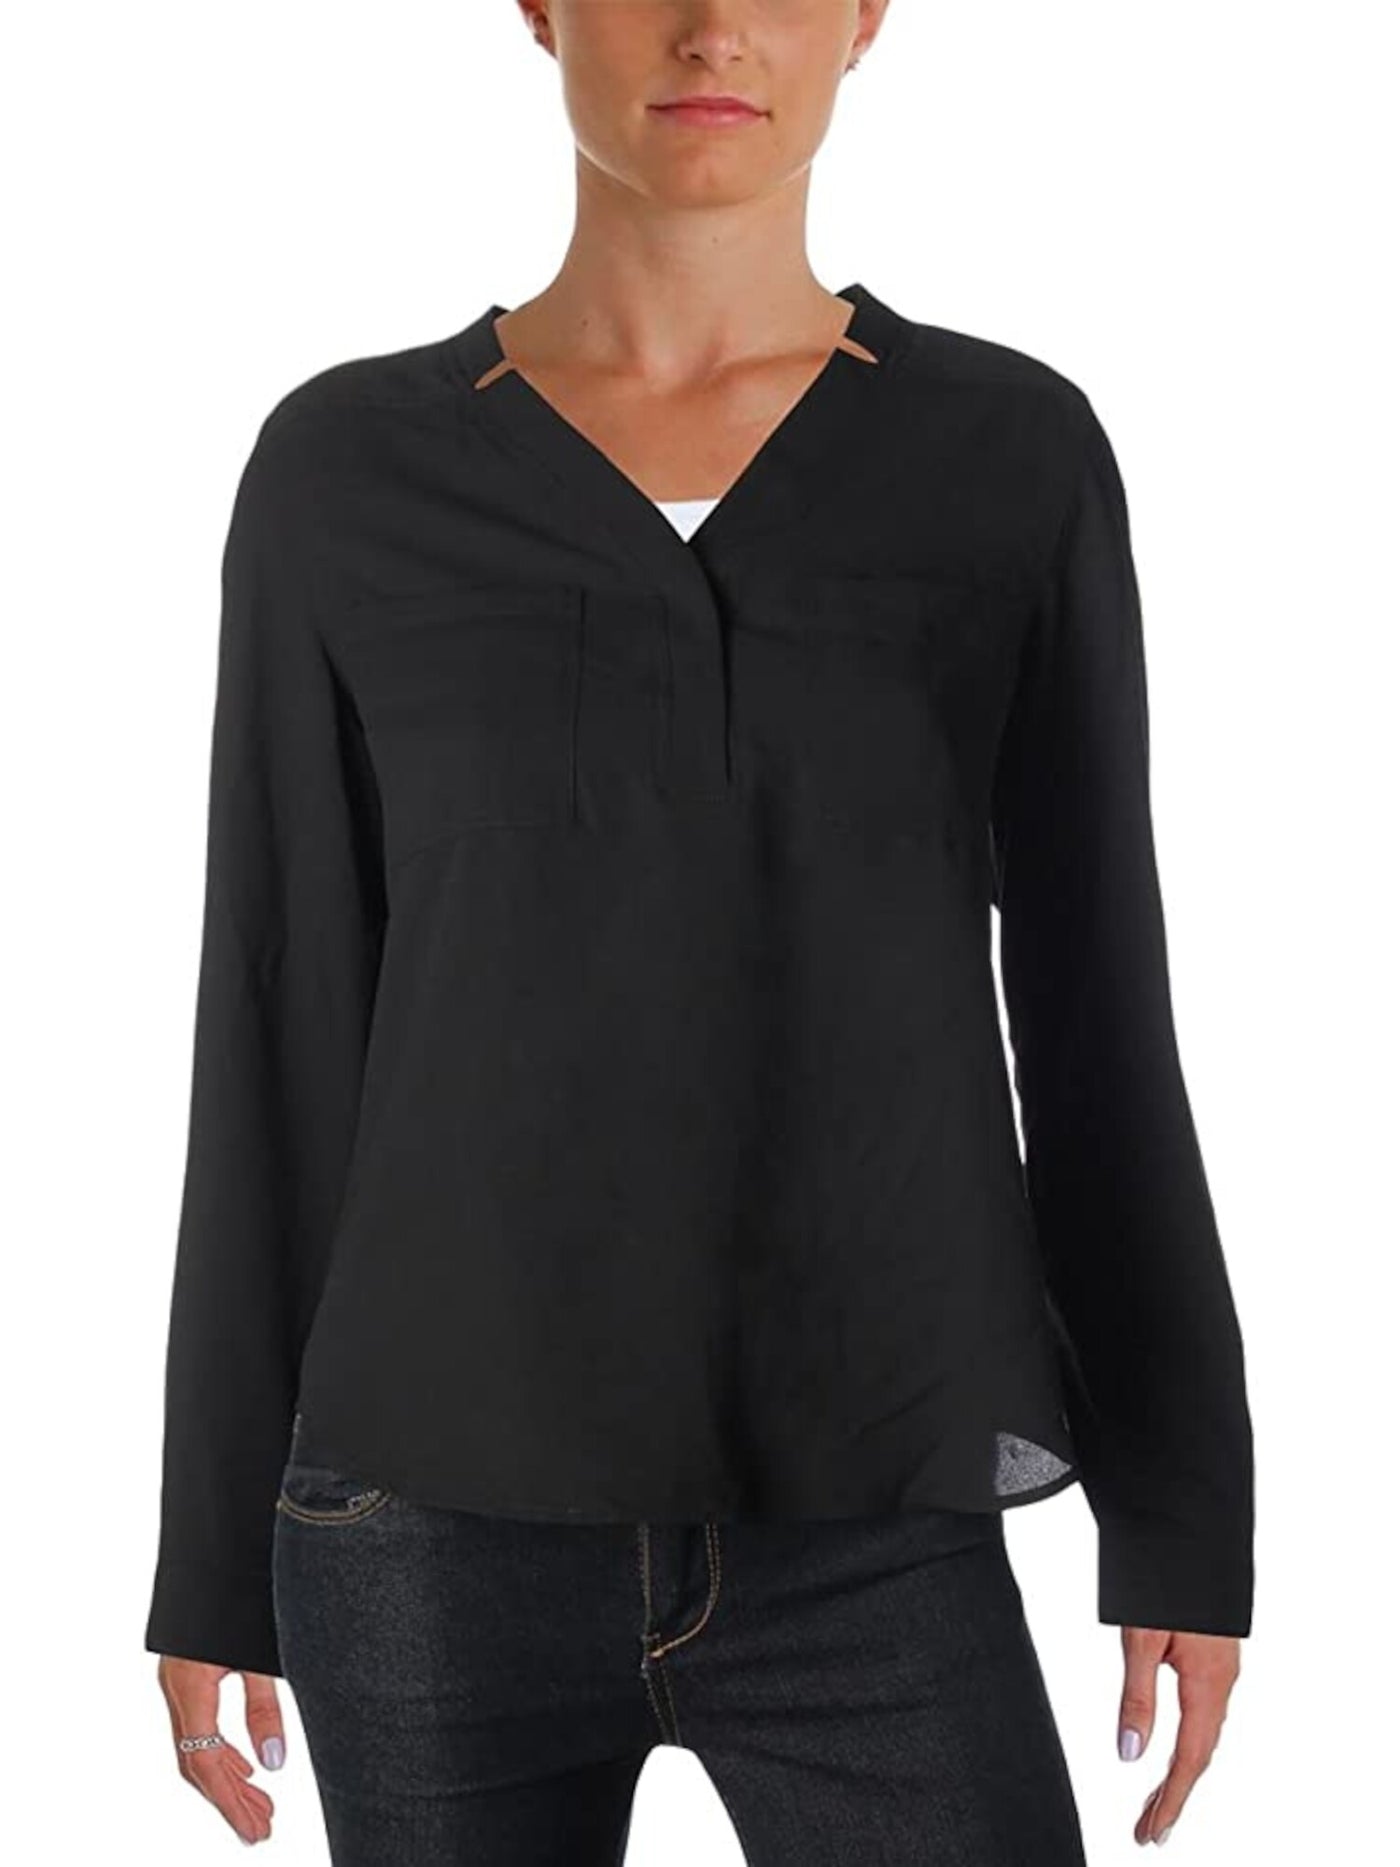 NINE WEST Womens Black Pocketed Pleated Notched Button Long Sleeve V Neck Wear To Work Blouse S